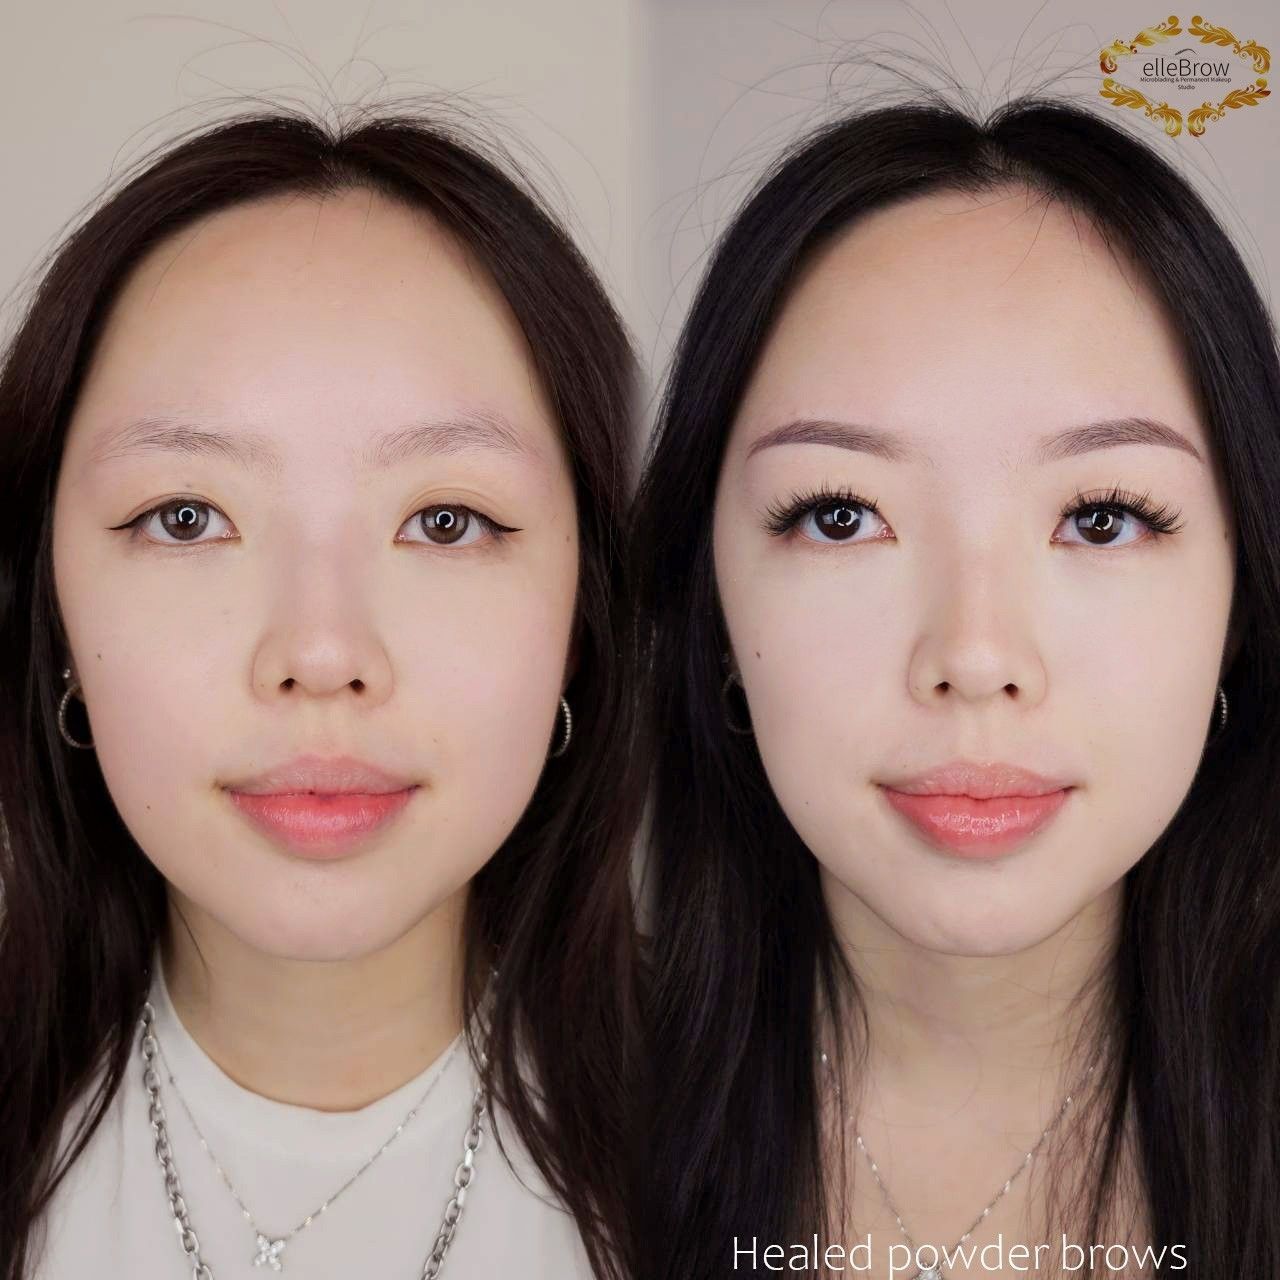 a before and after photo of an Asian woman with healed powder brows